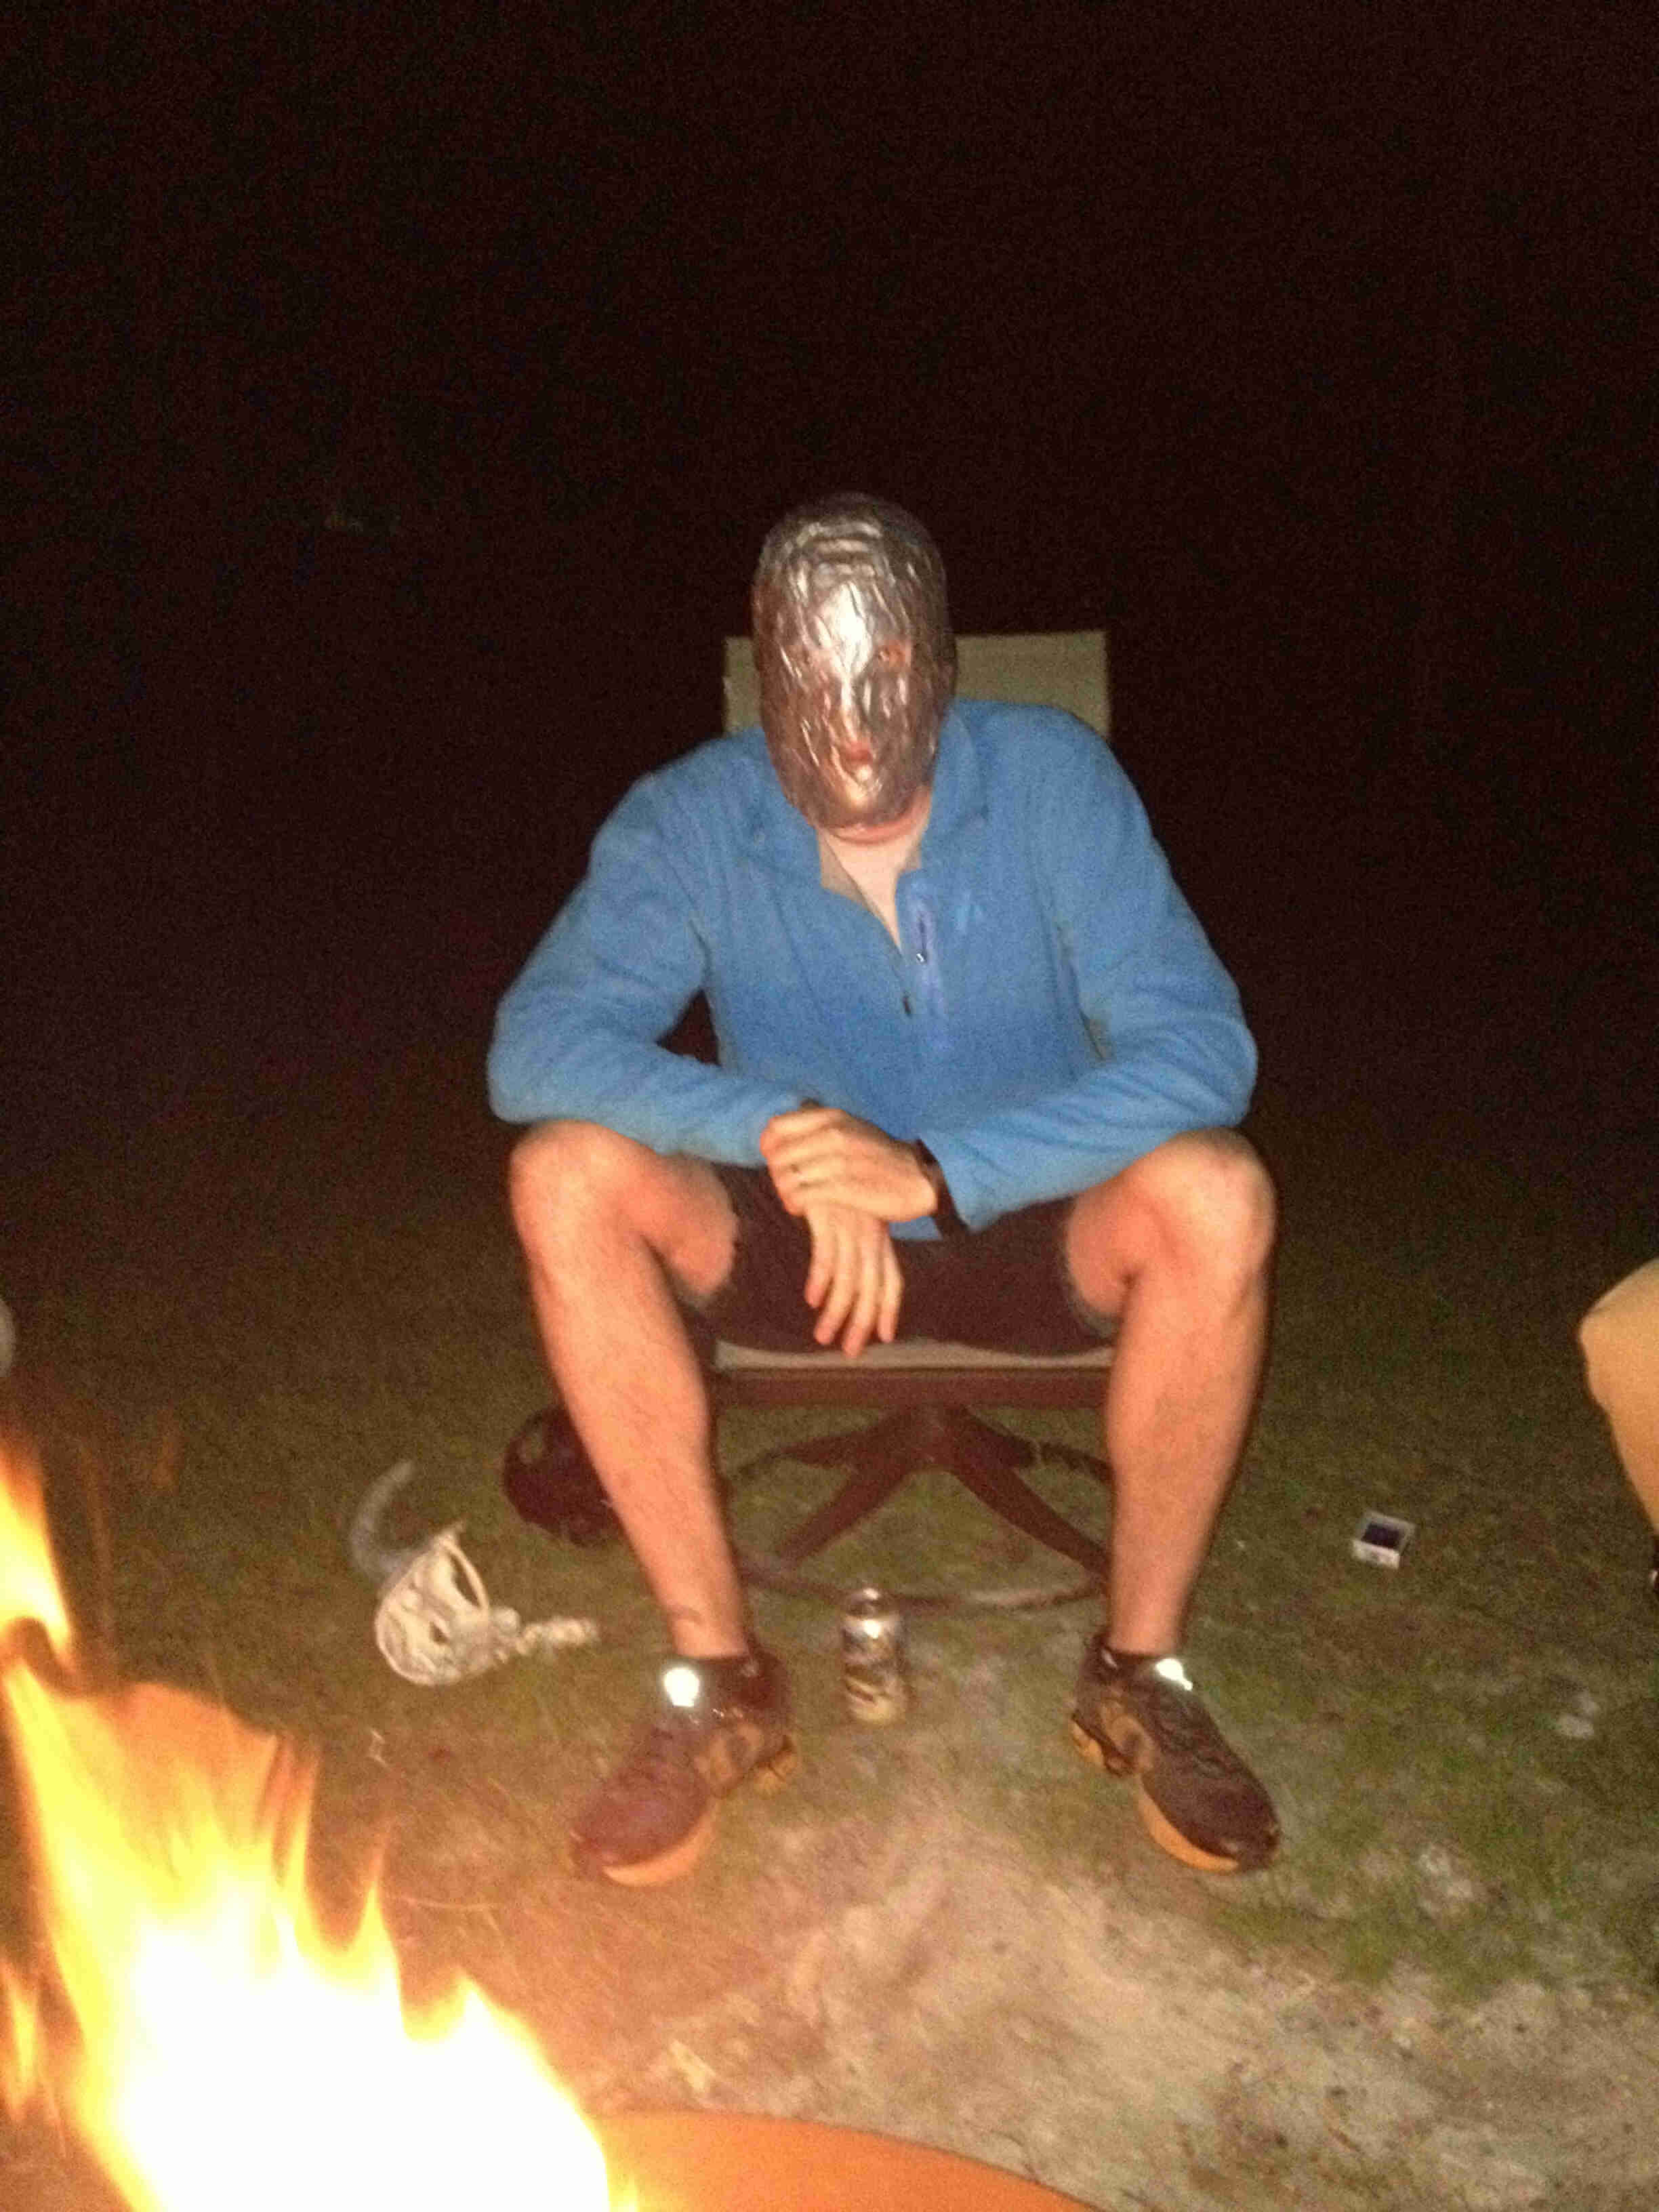 Front view of a person sitting in a chair, with duct tape wrapped around their face, behind a campfire at night